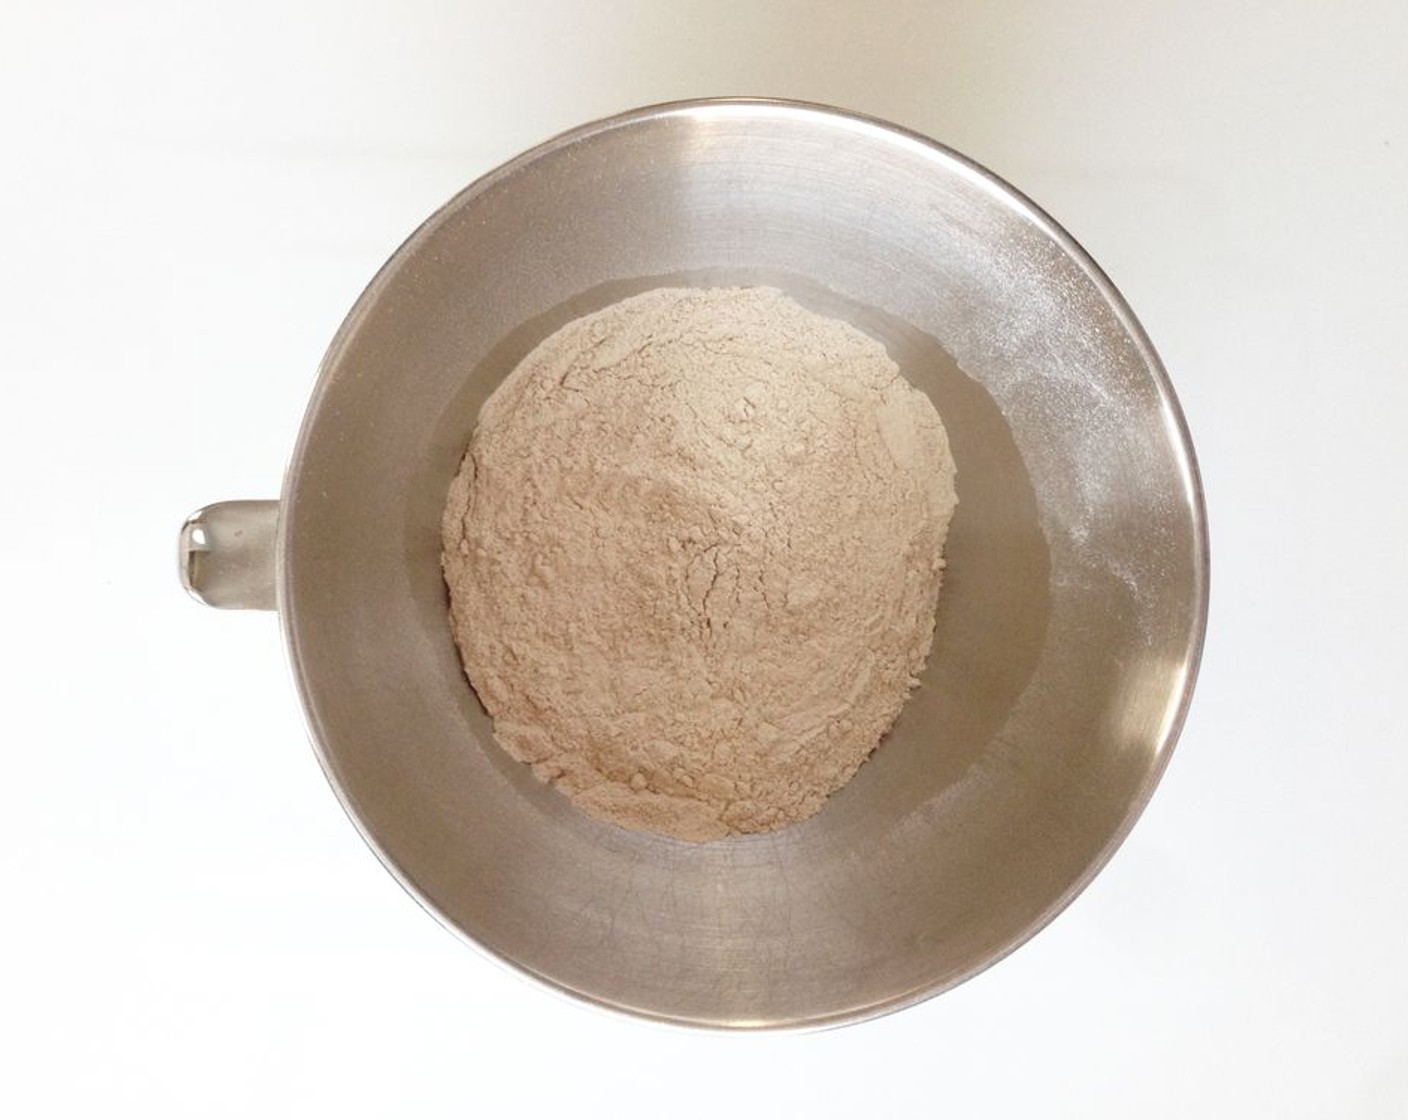 step 3 Mix together White Whole Wheat Flour (2 cups), Natural Sweetener (2 Tbsp), Baking Powder (1/2 Tbsp), Baking Soda (1 tsp), and Ground Cinnamon (1 tsp).